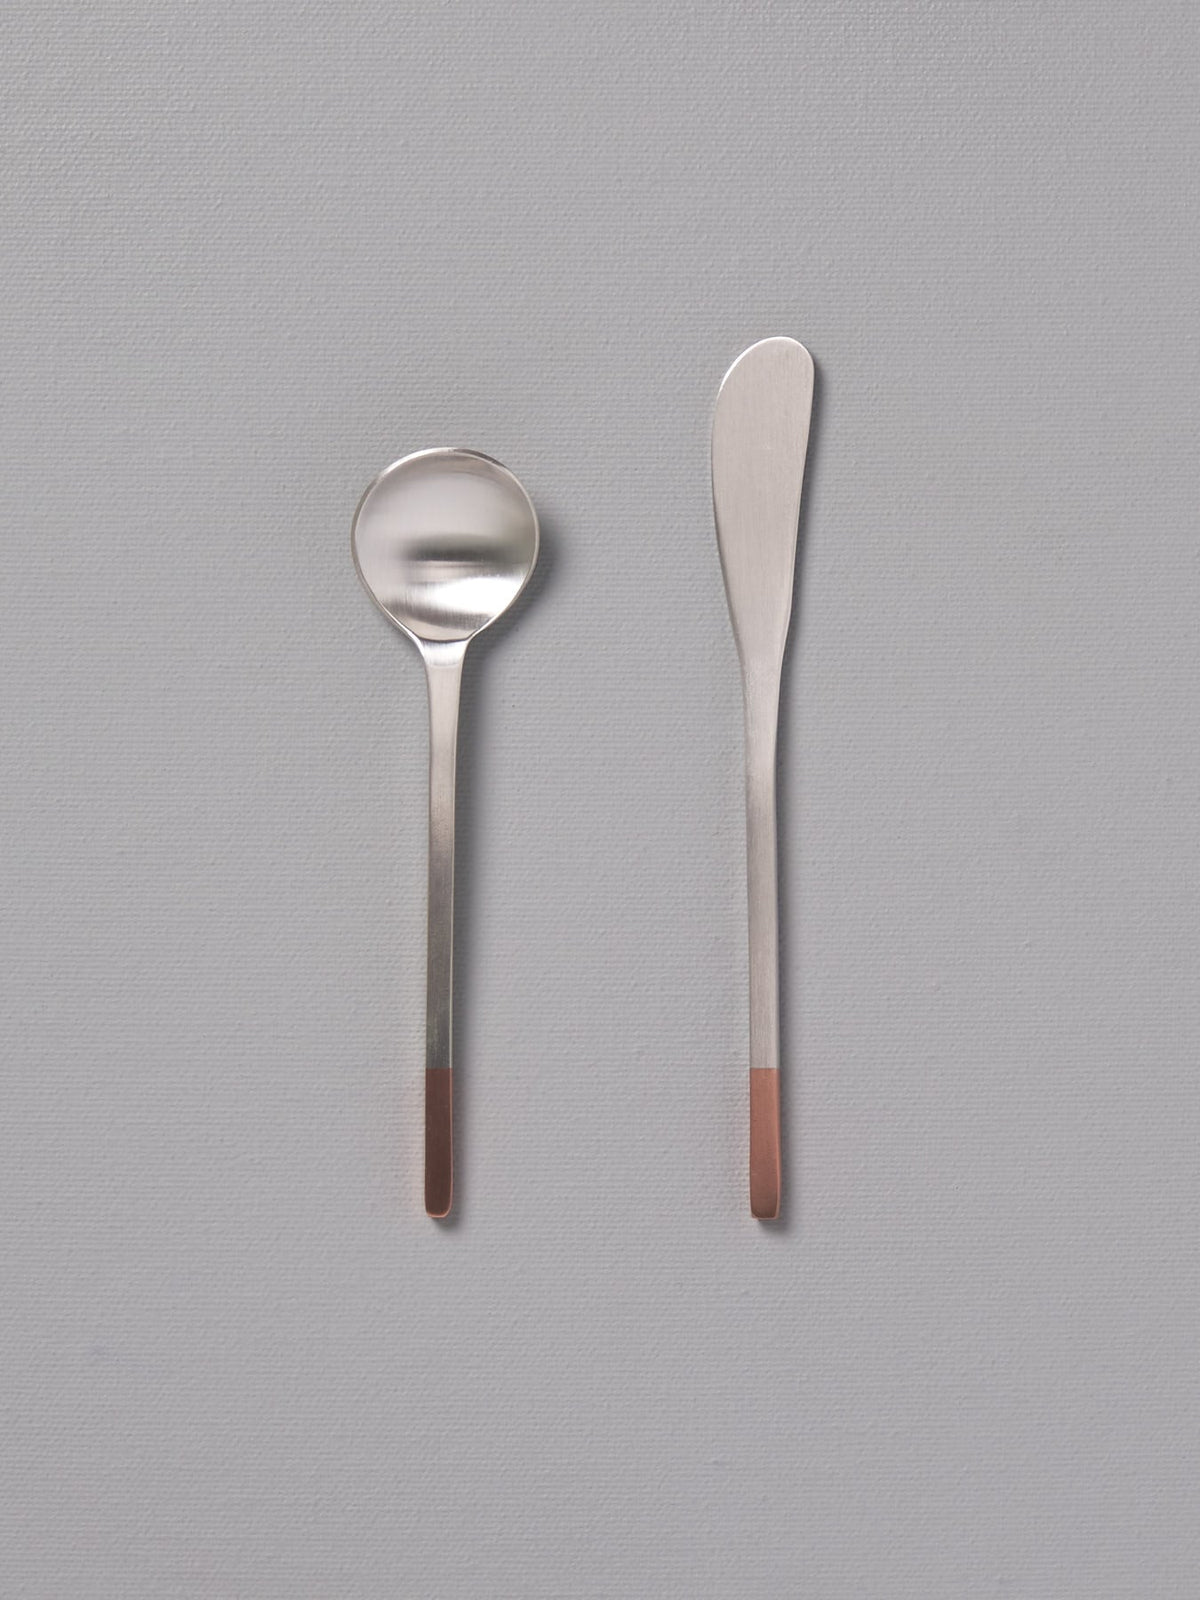 Two Kobo Aizawa Copper &amp; Stainless Steel Butter Knives on a grey surface.